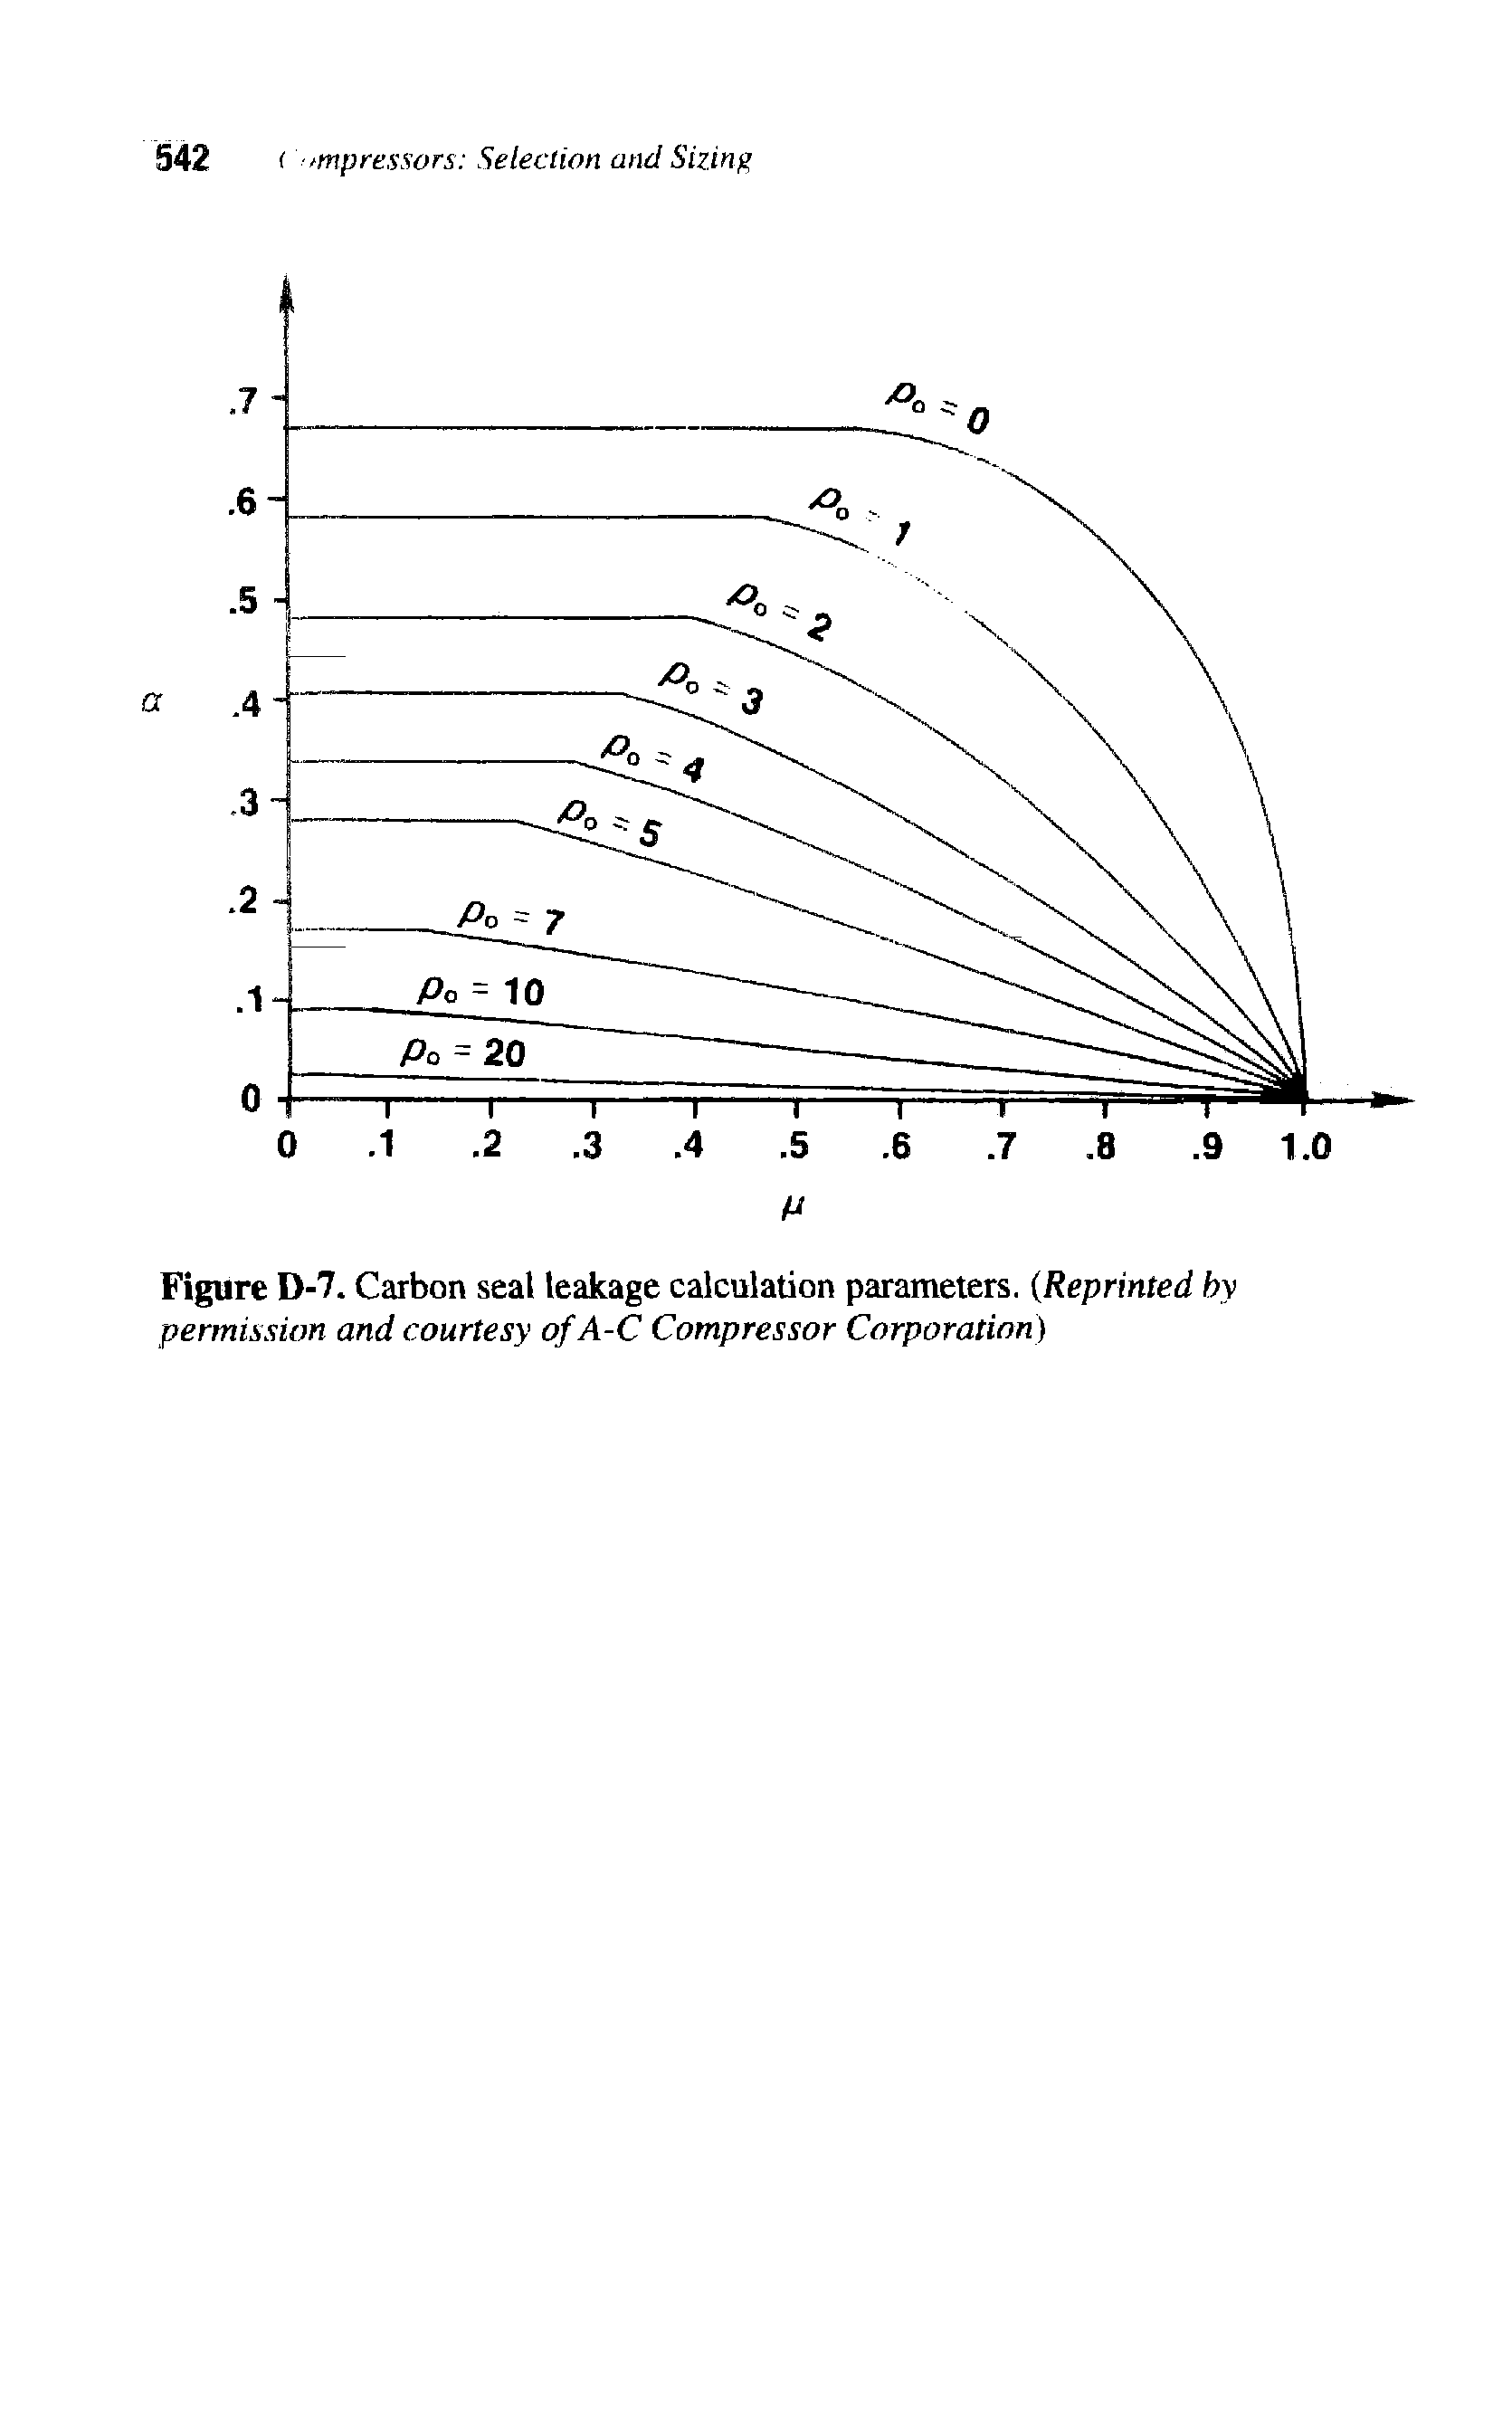 Figure D-7. Carbon seal leakage calculation parameters. Reprinted by permission and courtesy ofA-C Compressor Corporation)...